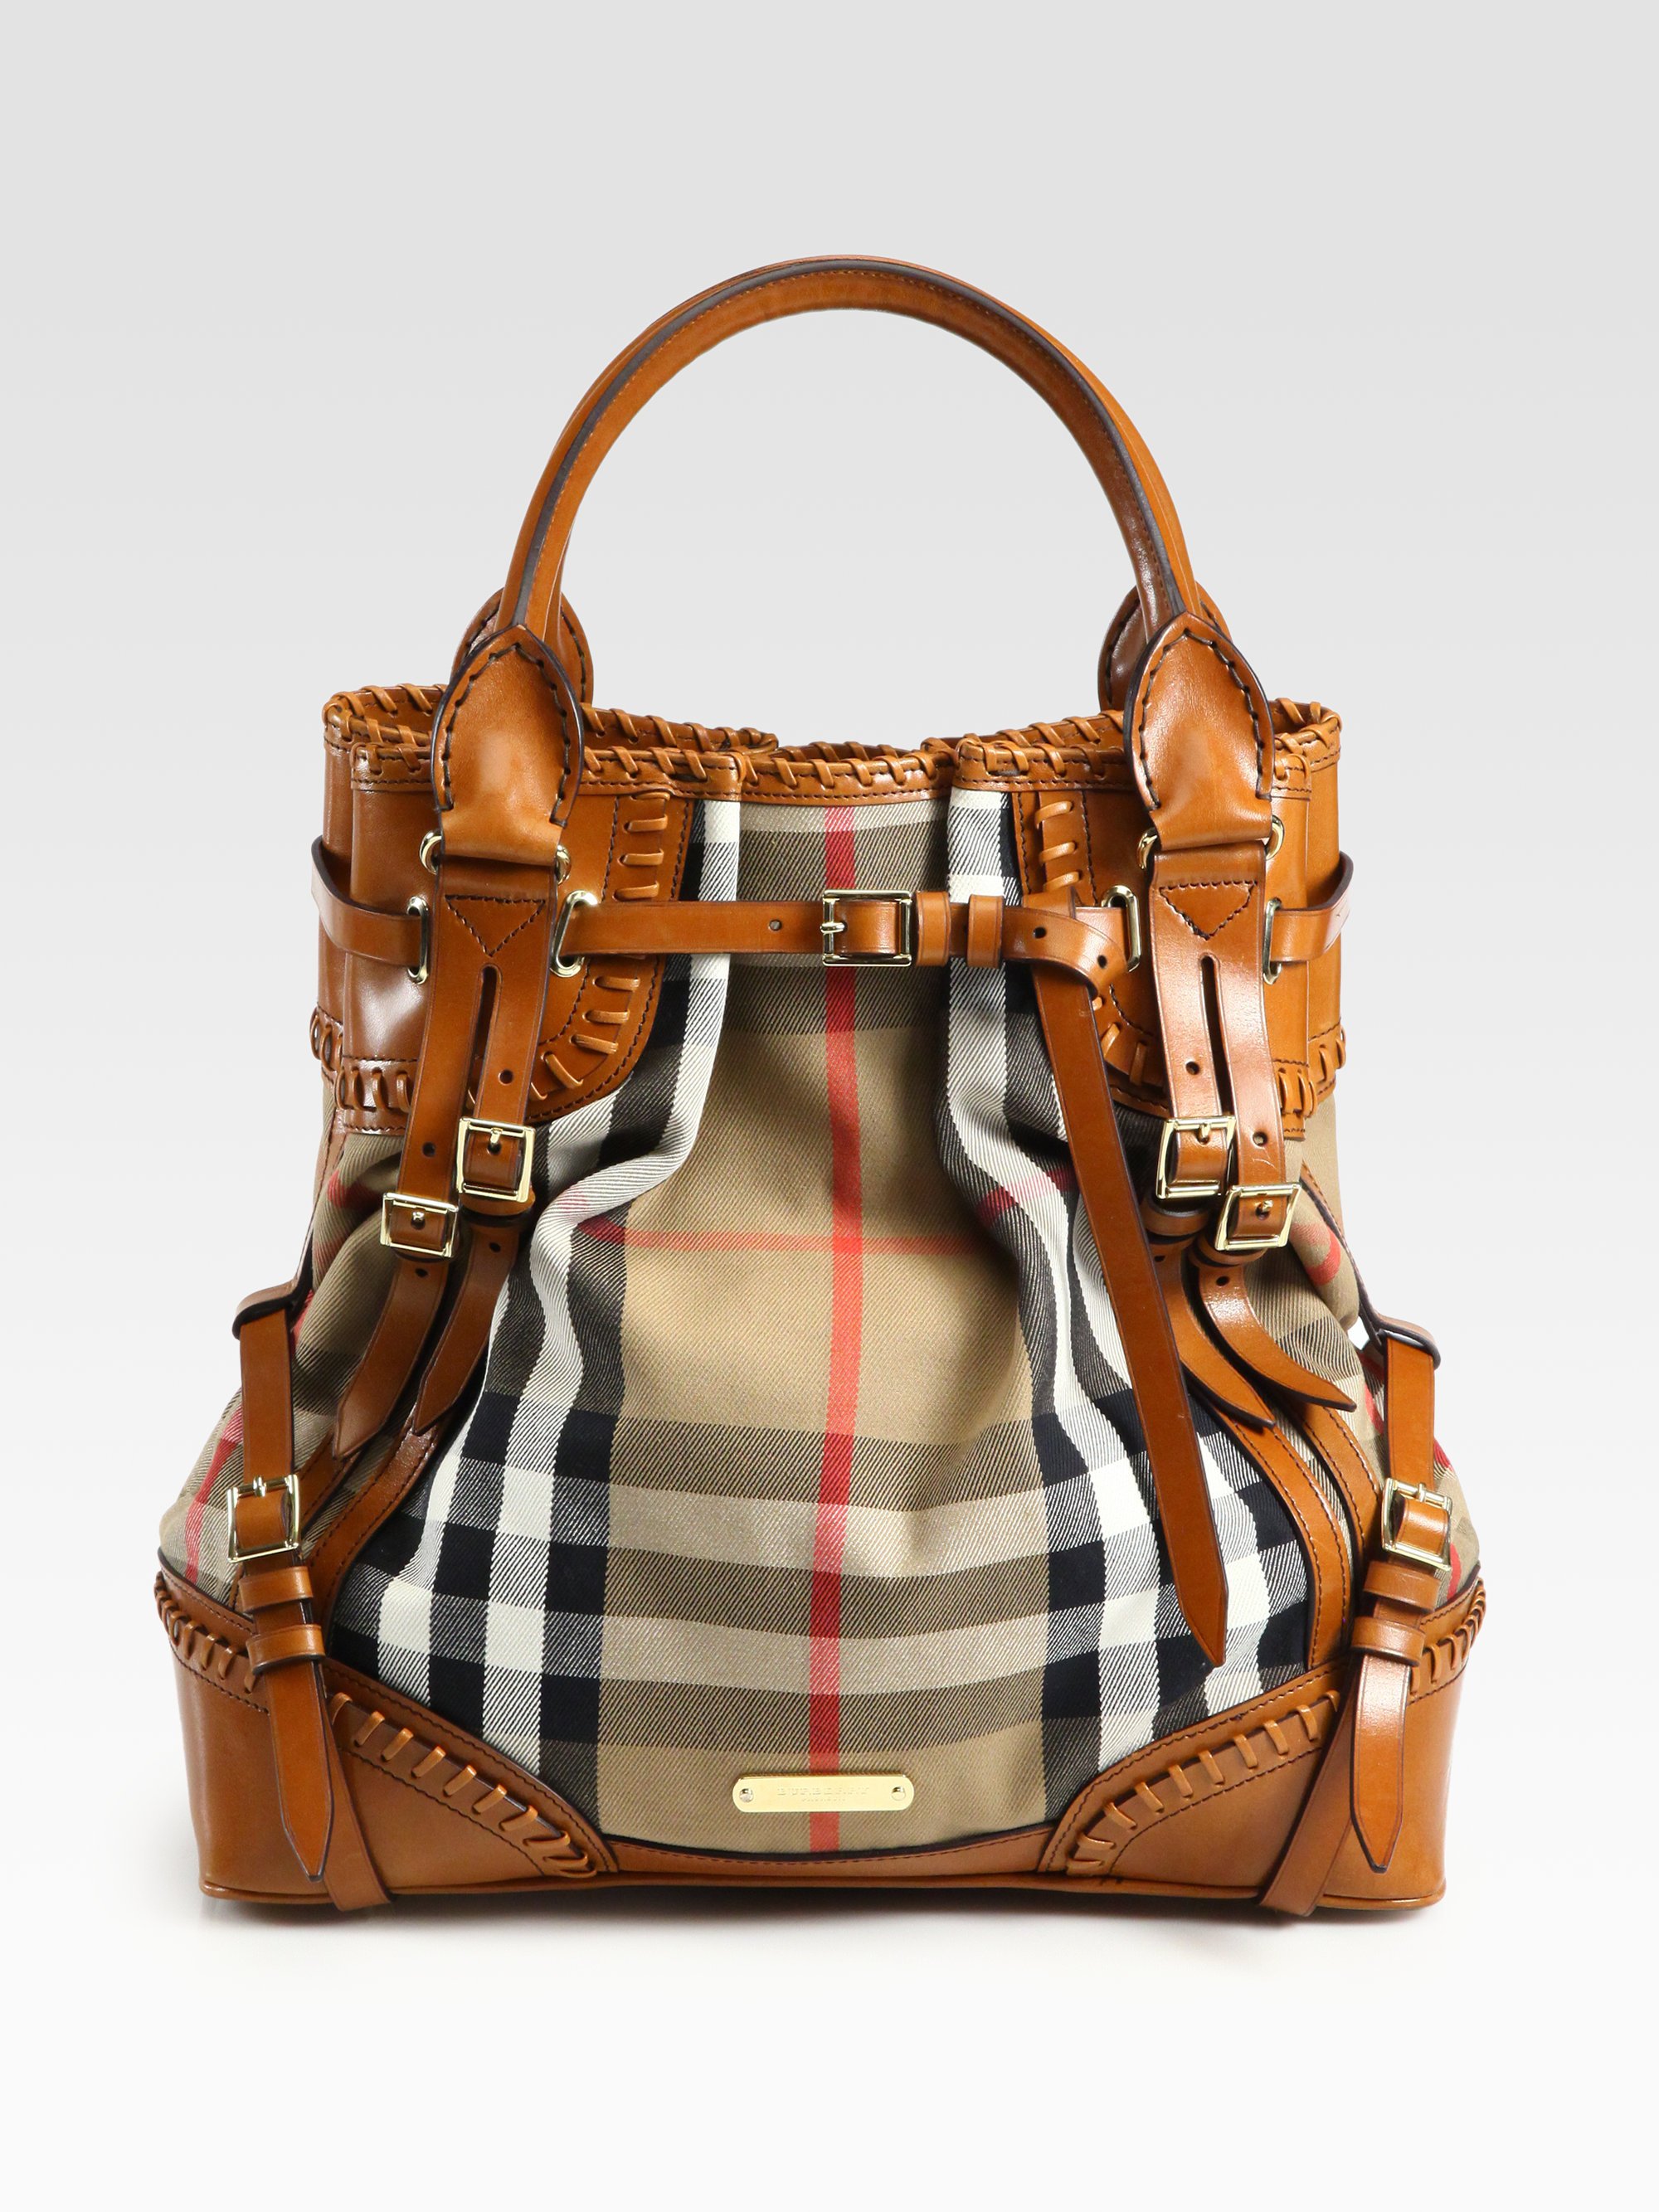 Burberry Prorsum Whipstitch Leather & Check Canvas Tote Bag in Brown - Lyst